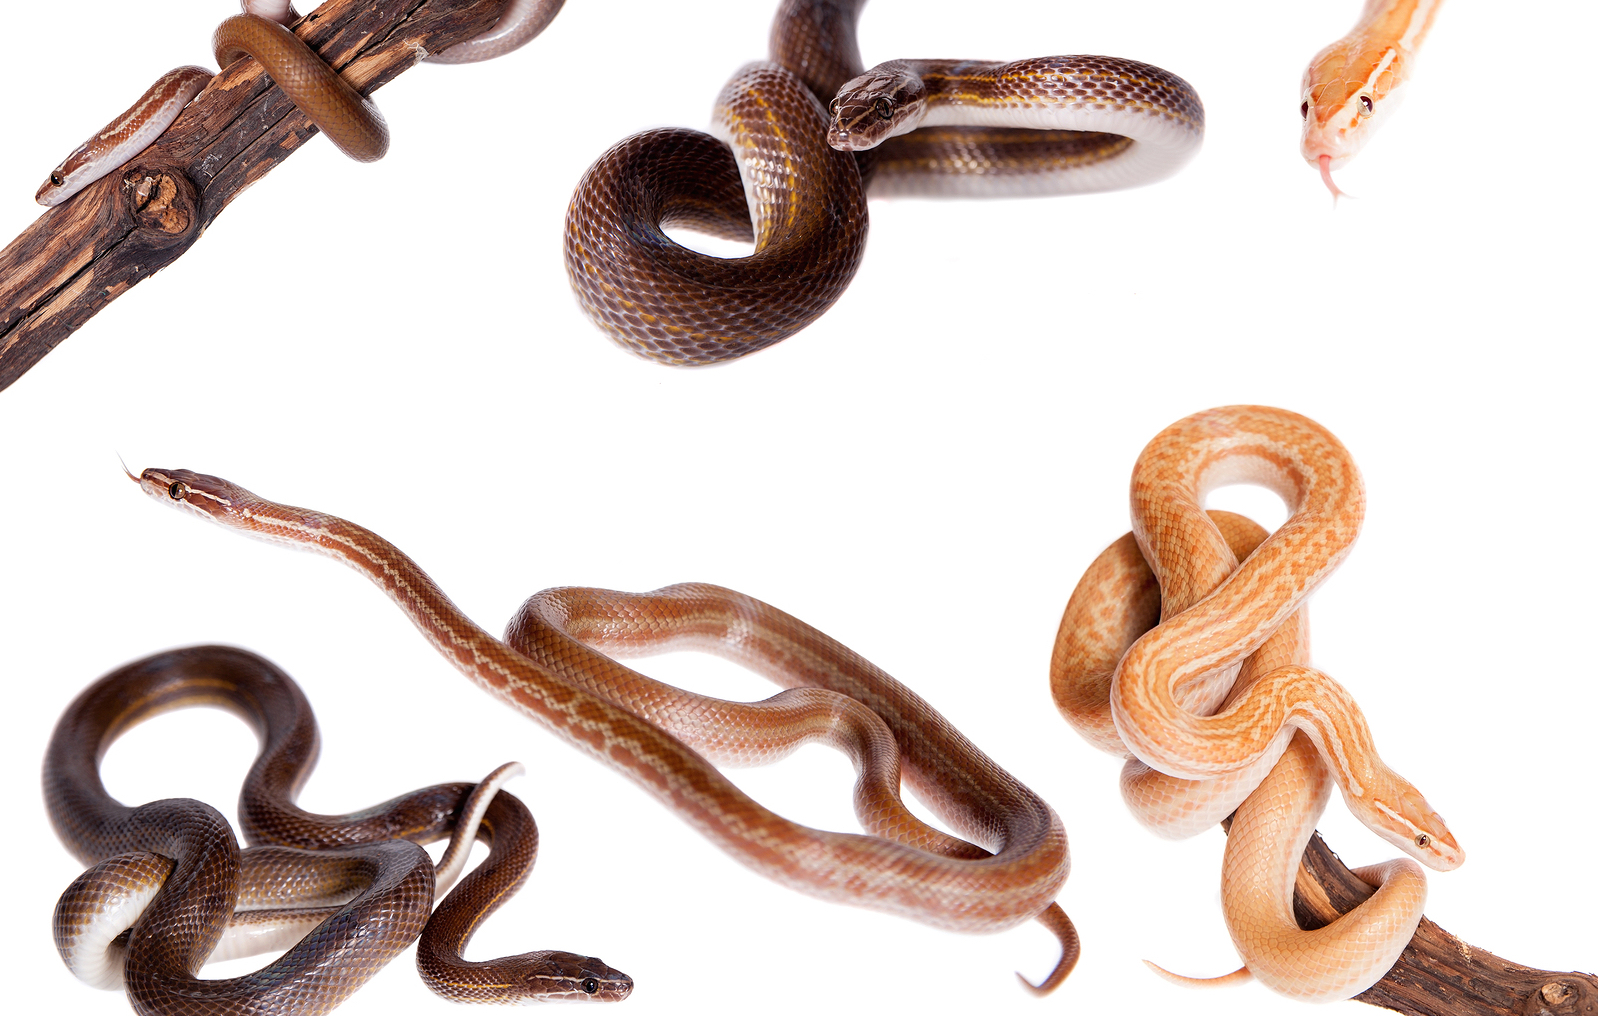 Different Types Of Snakes